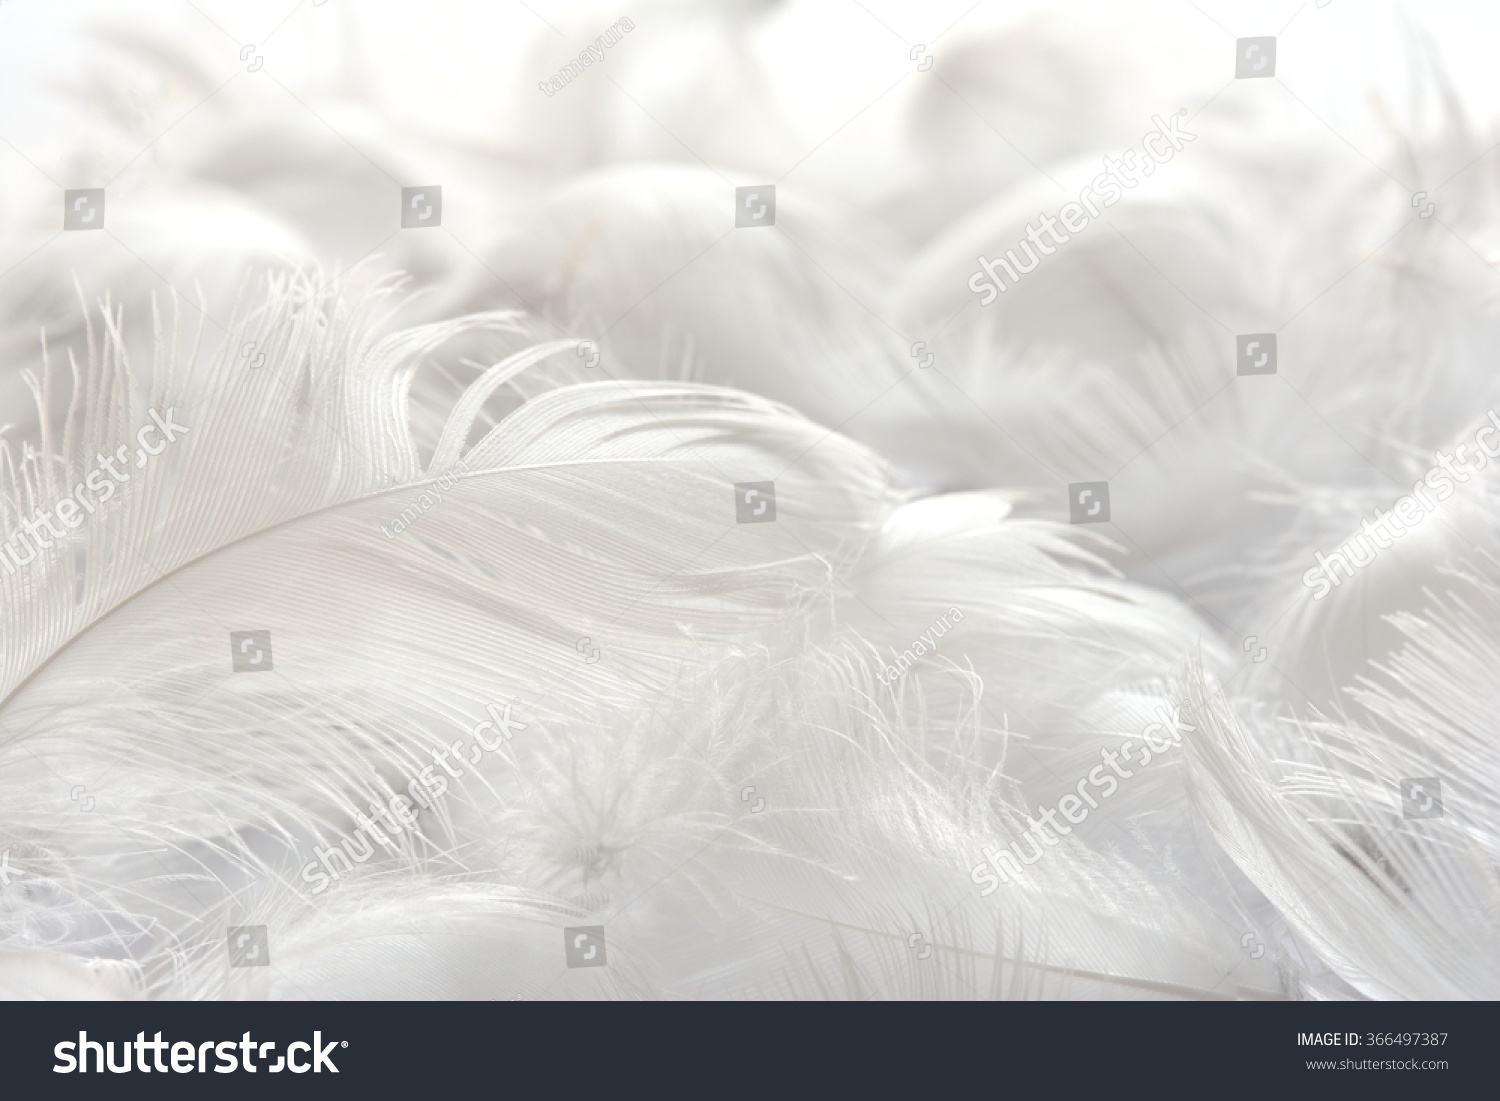 white feather background
 #366497387